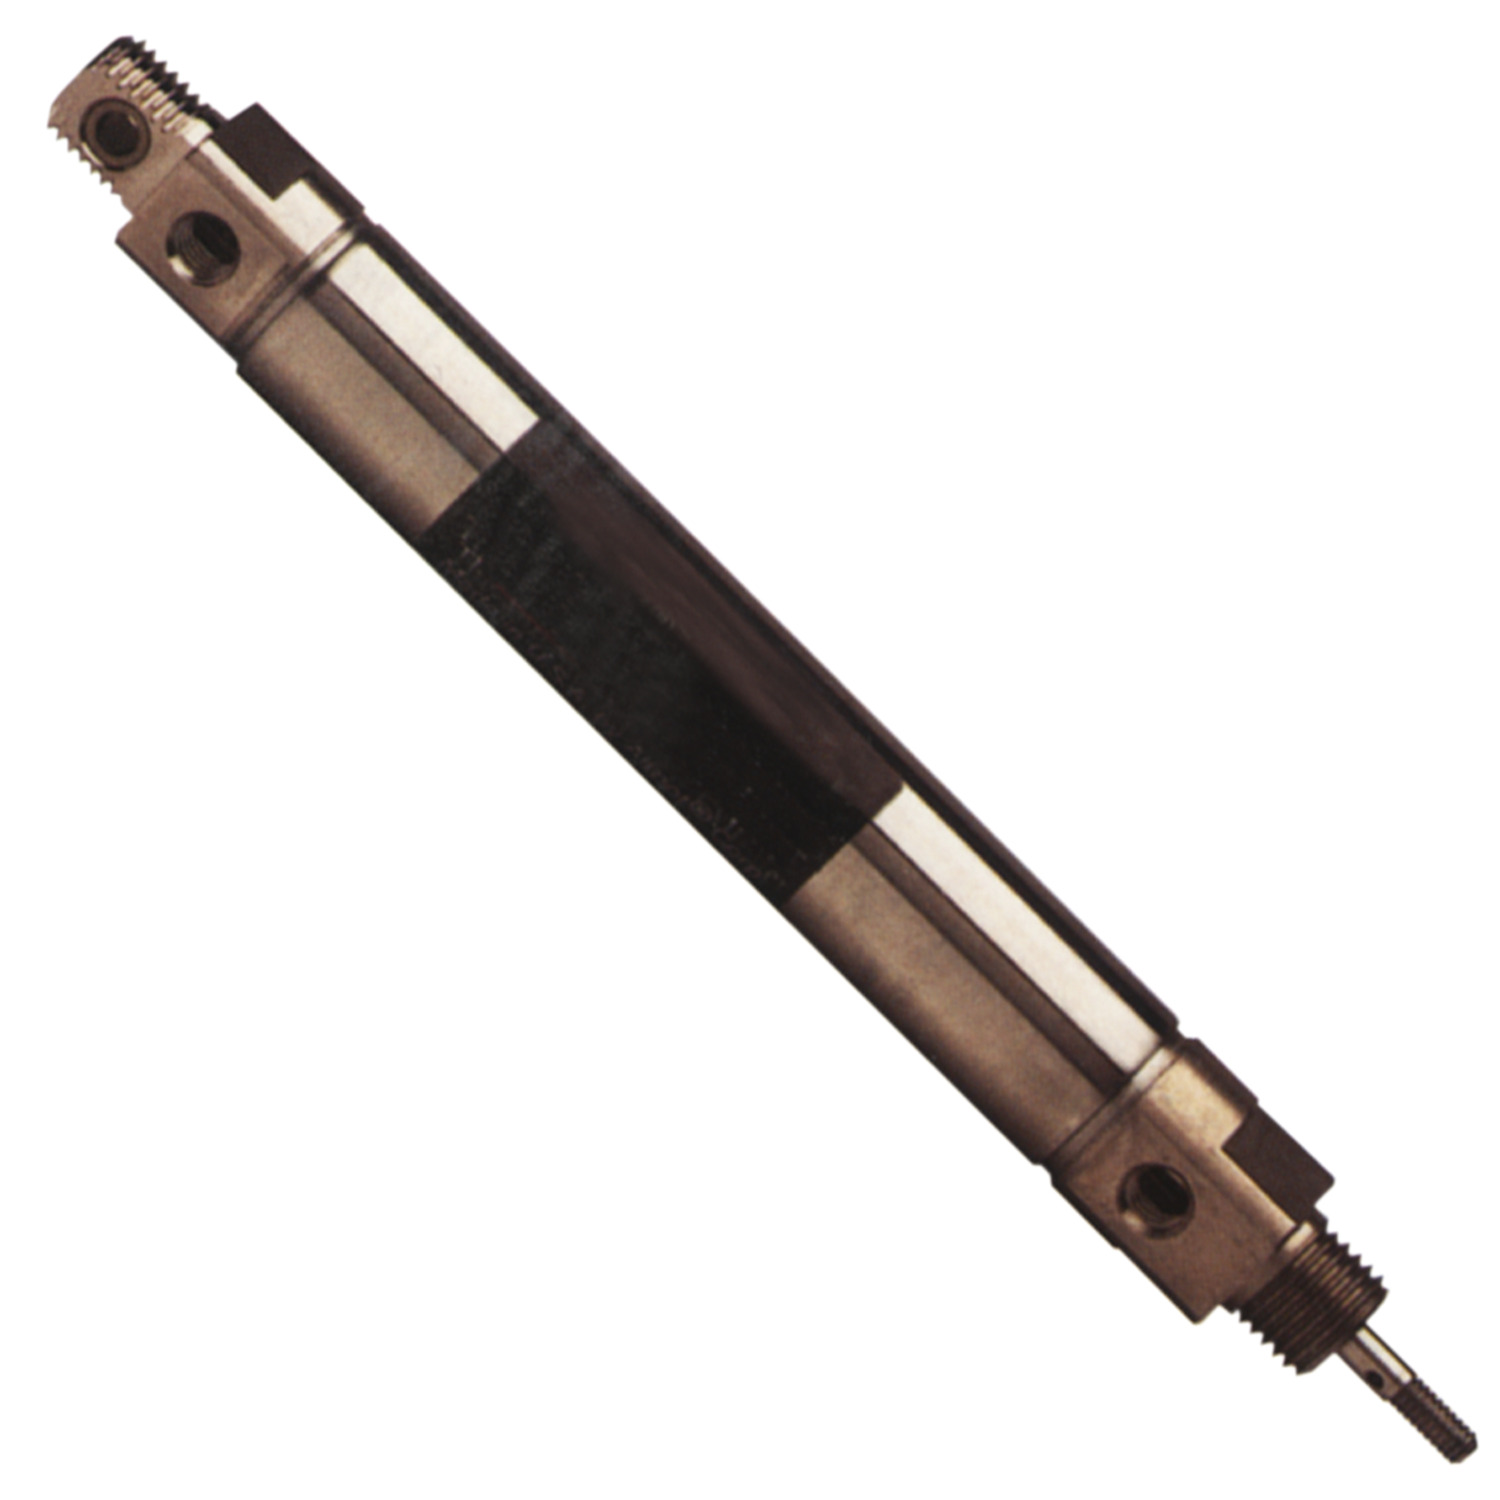 Anti - Stiction Air Cylinder - 9.3mm Bore Ultra Low Friction and ultra smooth motion. Can operate at extreme temperatures.